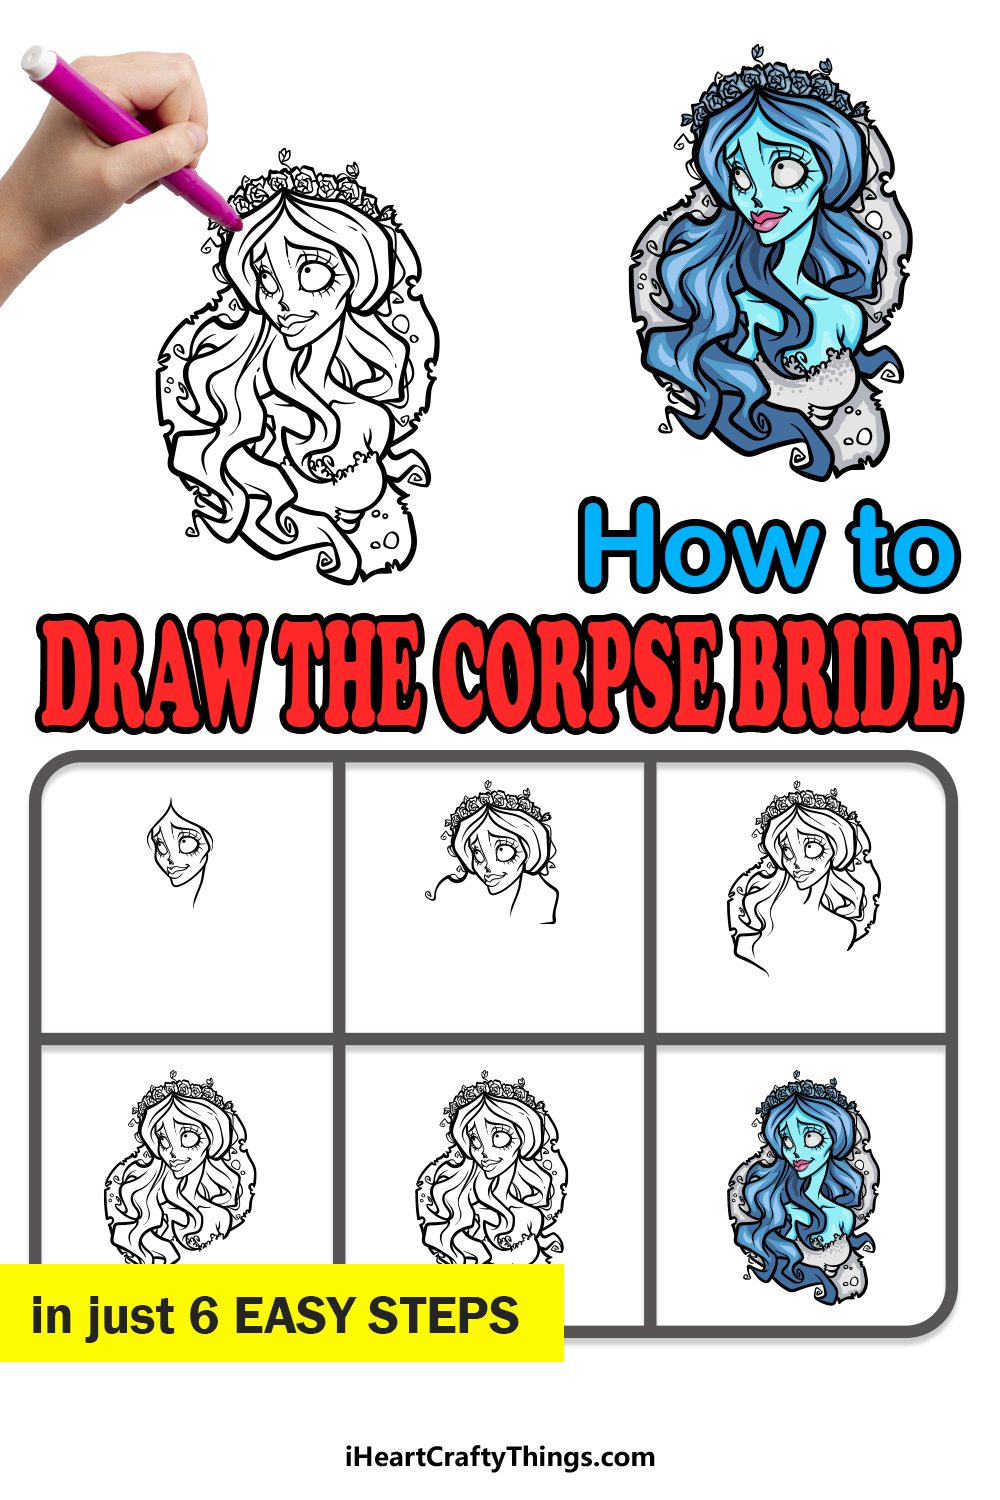 how to draw the Corpse Bride in 6 easy steps